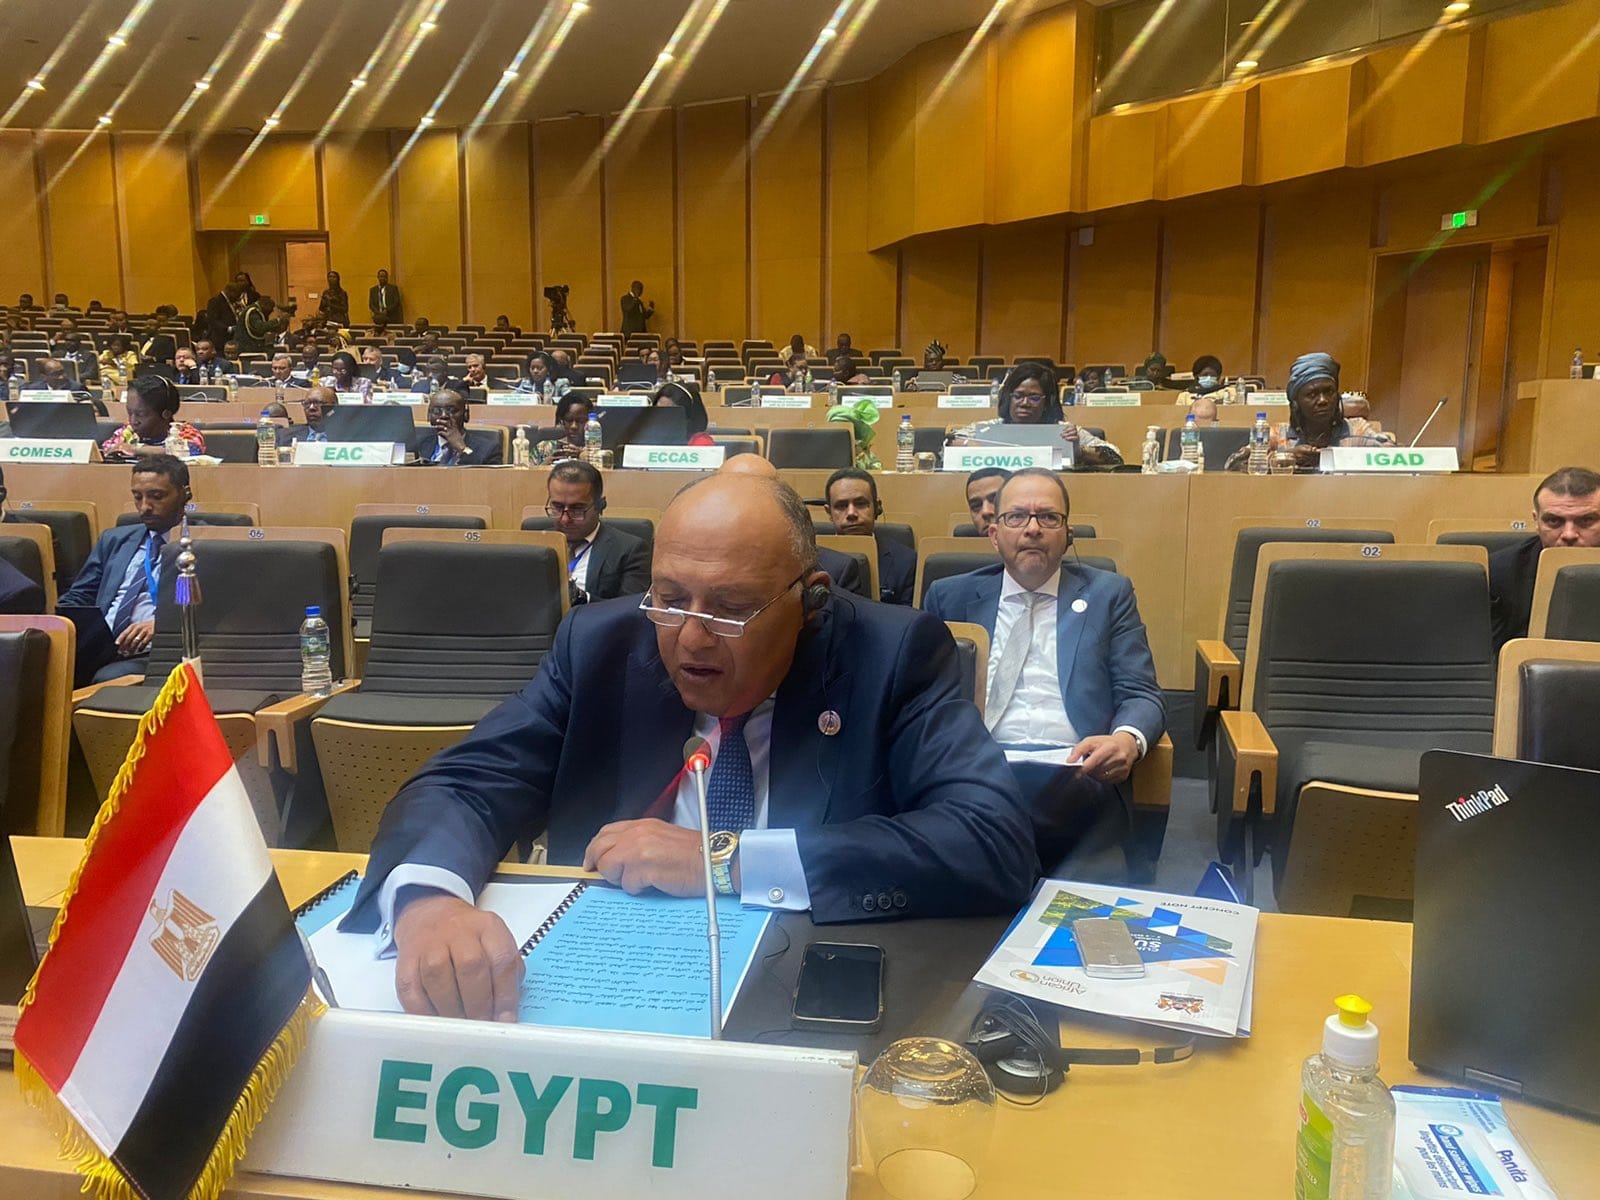 Sameh Shoukry calls for amending the current composition of the African Peace and Security Council to be more representative of the North African region